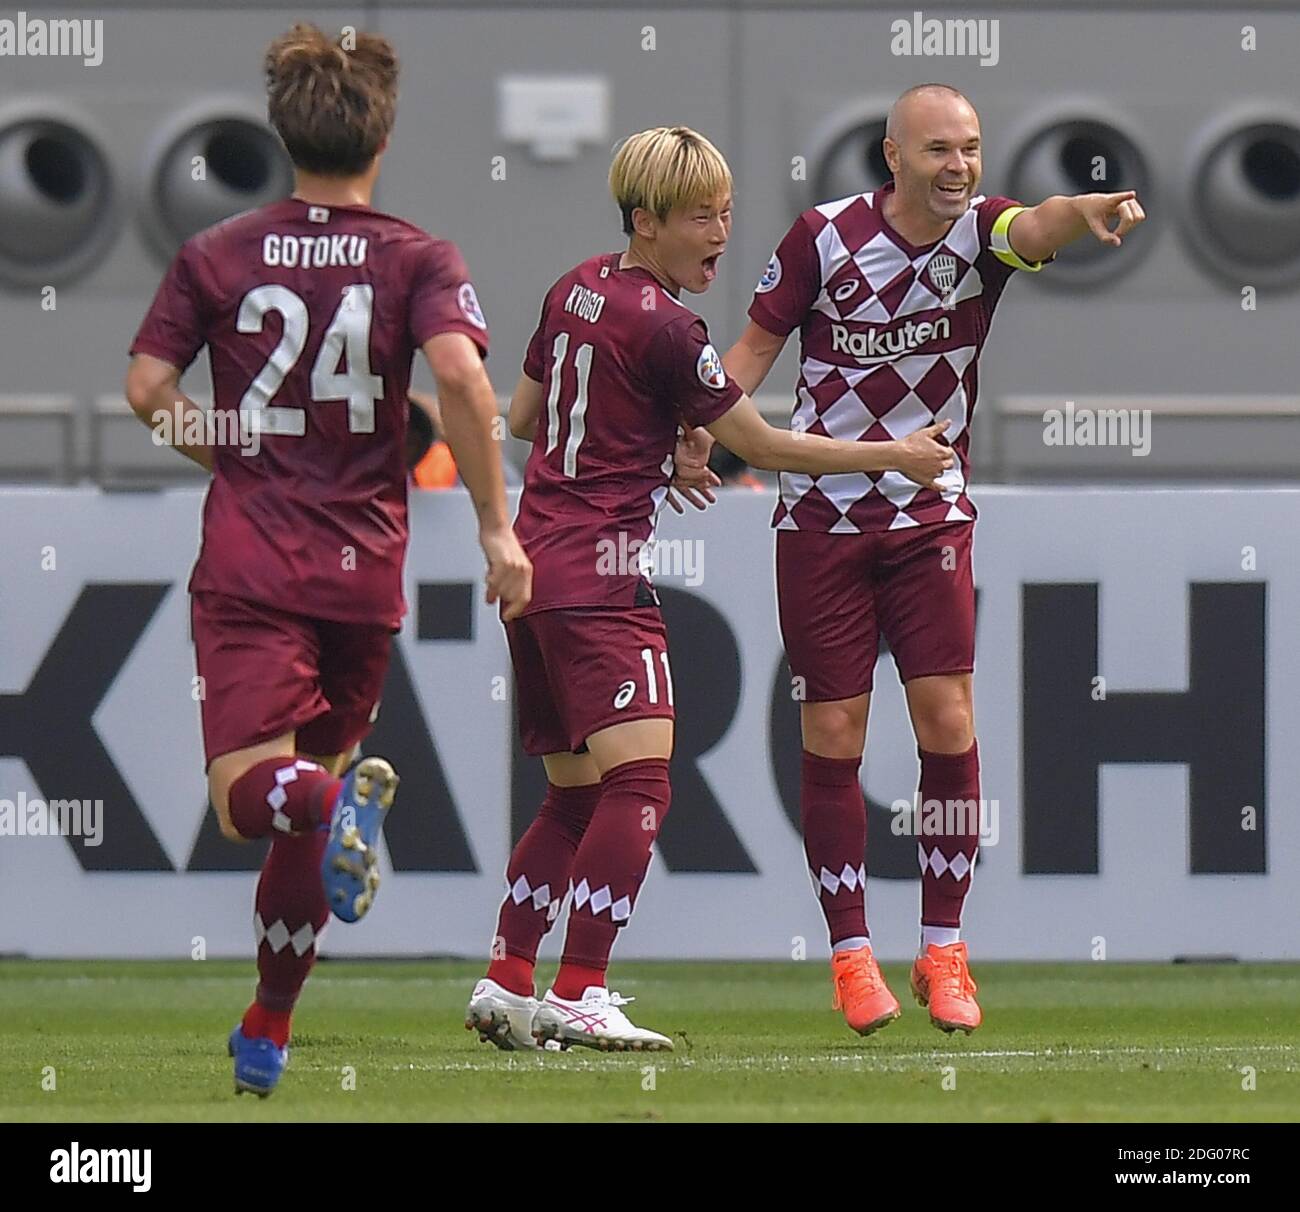 Doha, Qatar. 7th Dec, 2020. Andres Iniesta (R) of Vissel Kobe celebrates his goal during the round of 16 match of the AFC Champions League between Shanghai SIPG FC of China and Vissel Kobe of Japan in Doha, Qatar, Dec. 7, 2020. Credit: Nikku/Xinhua/Alamy Live News Stock Photo